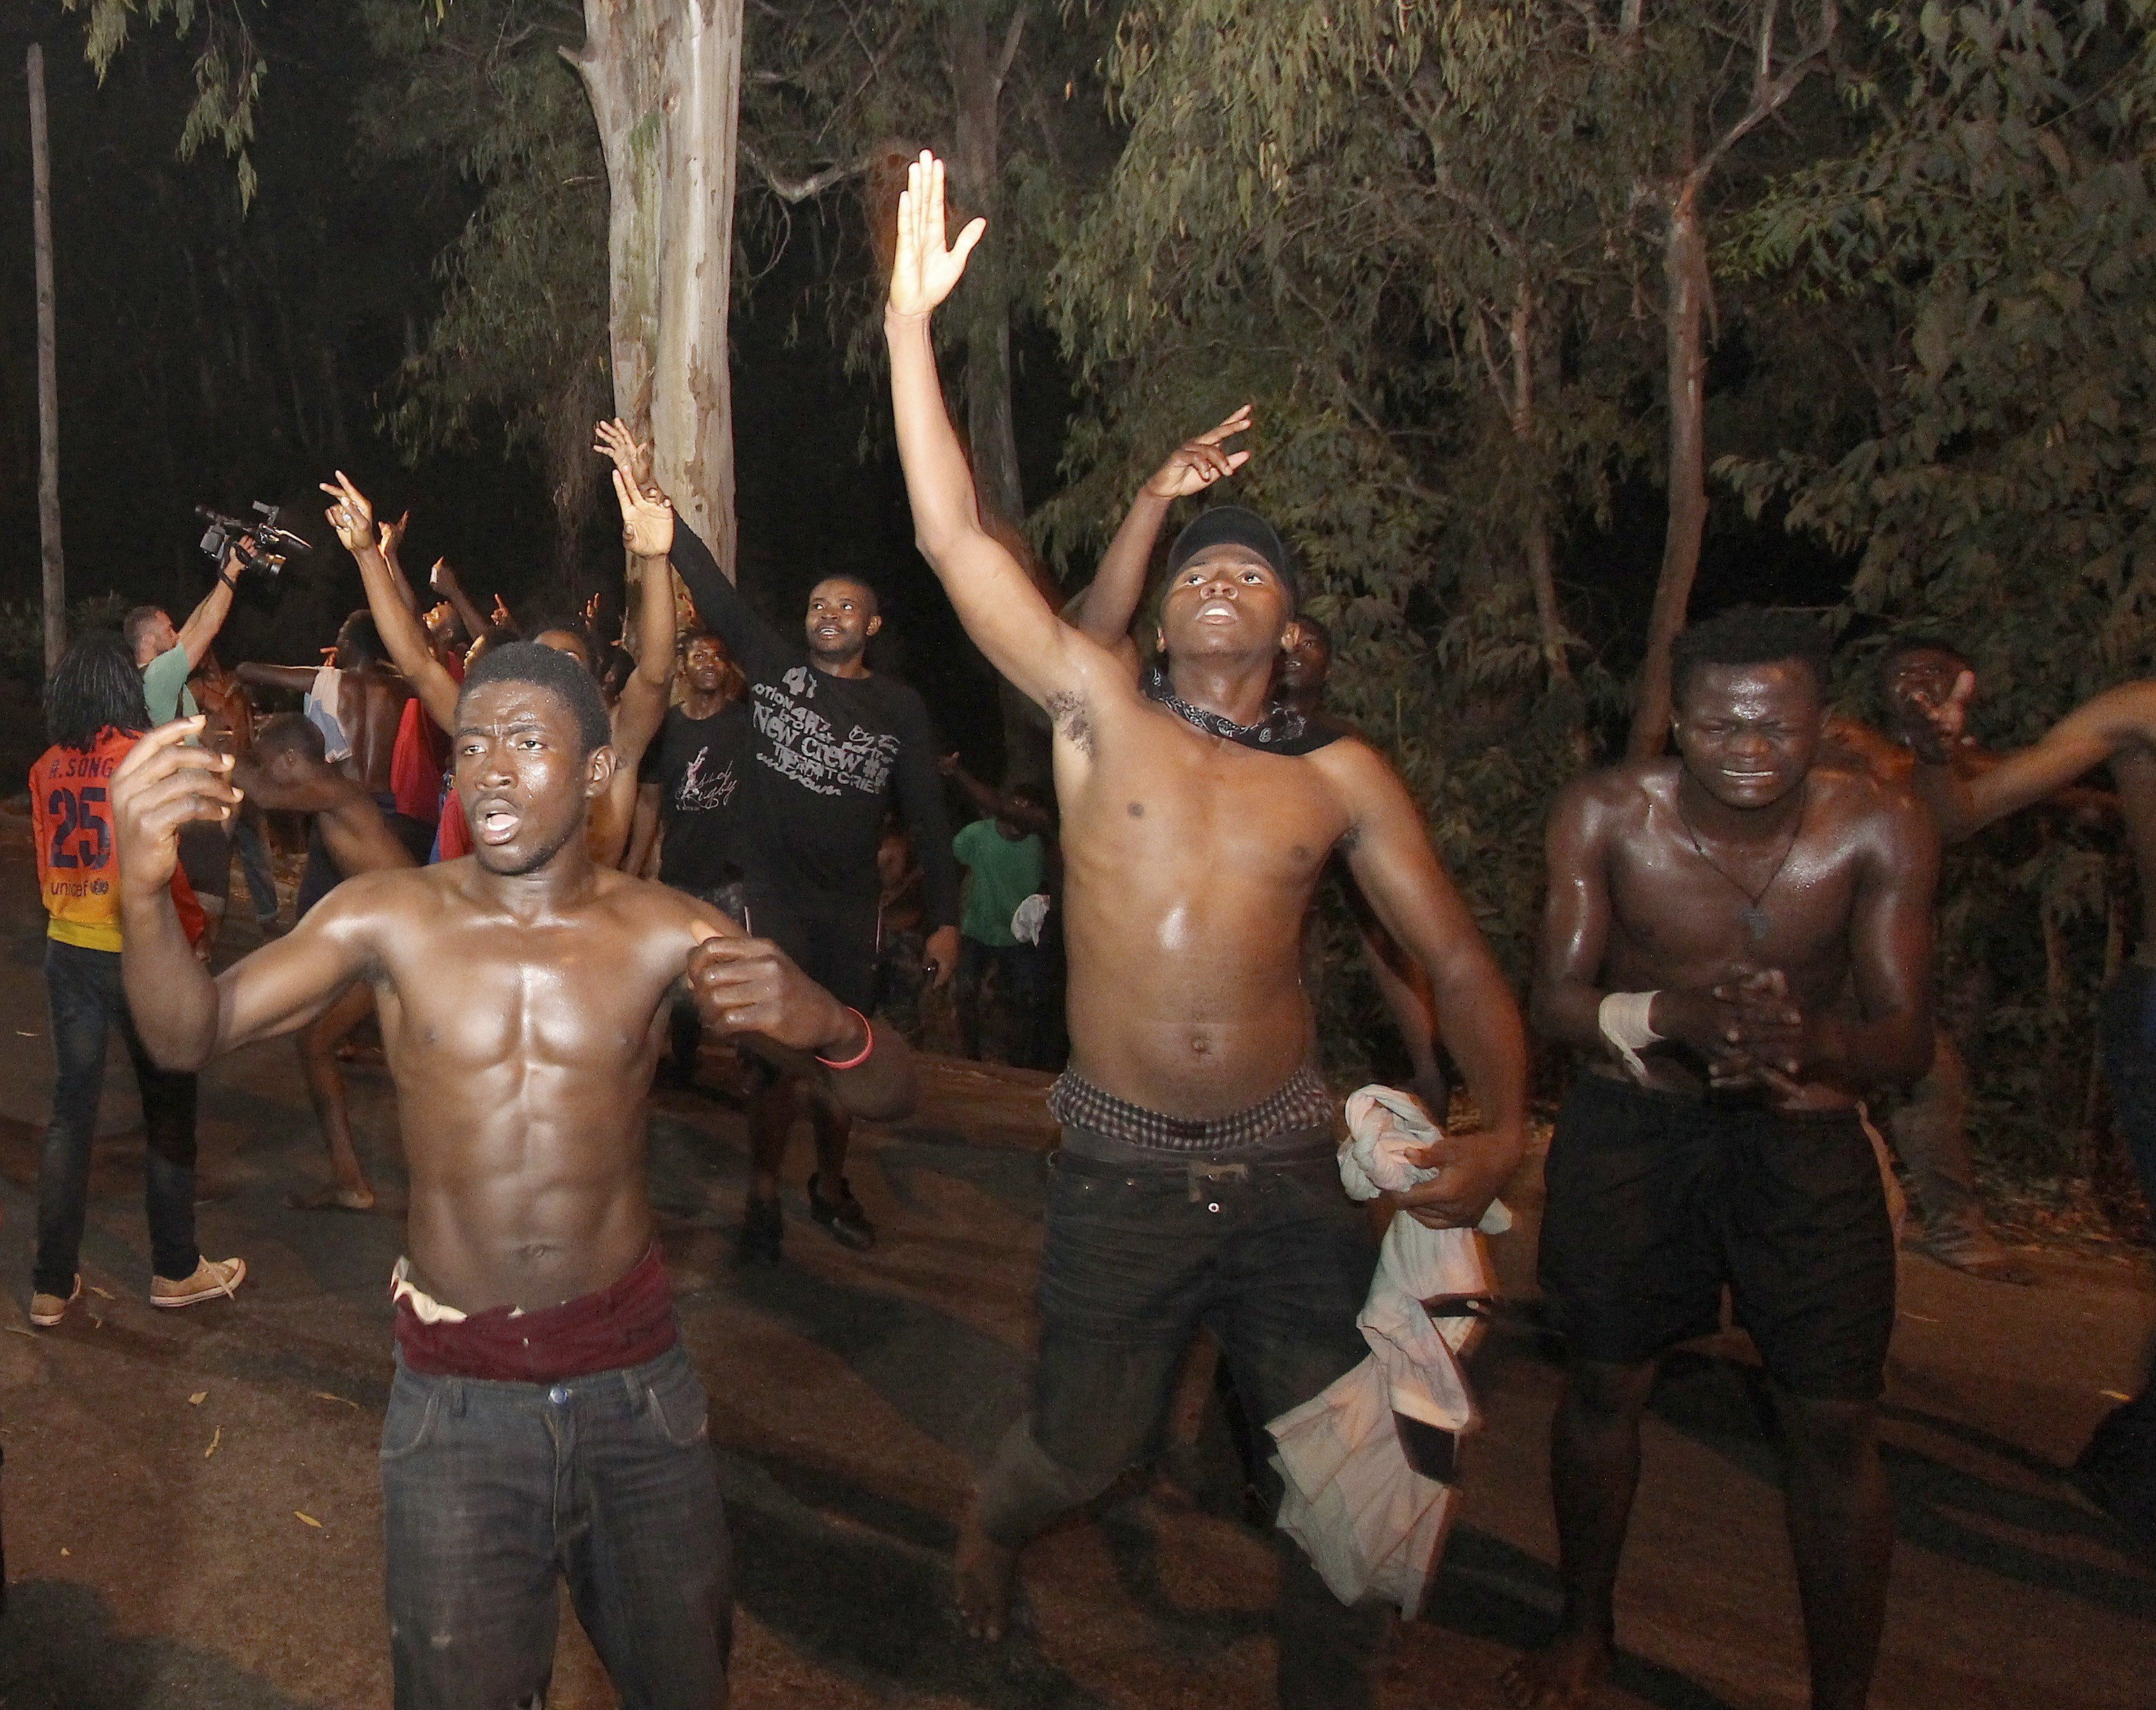 epa06129686 A group of sub-Saharan migrants celebrate after managing to enter Spanish territory in the city of Ceuta, Spanish enclave in northern Africa, early morning 07 August 2017. Some 200 migrants managed to cross the Spanish border, catching the Moroccan and Spanish security forces by surprise. Authorities were expecting the migrants to jump the fences, but the group entered Spain across the border crossing.  EPA/Reduan